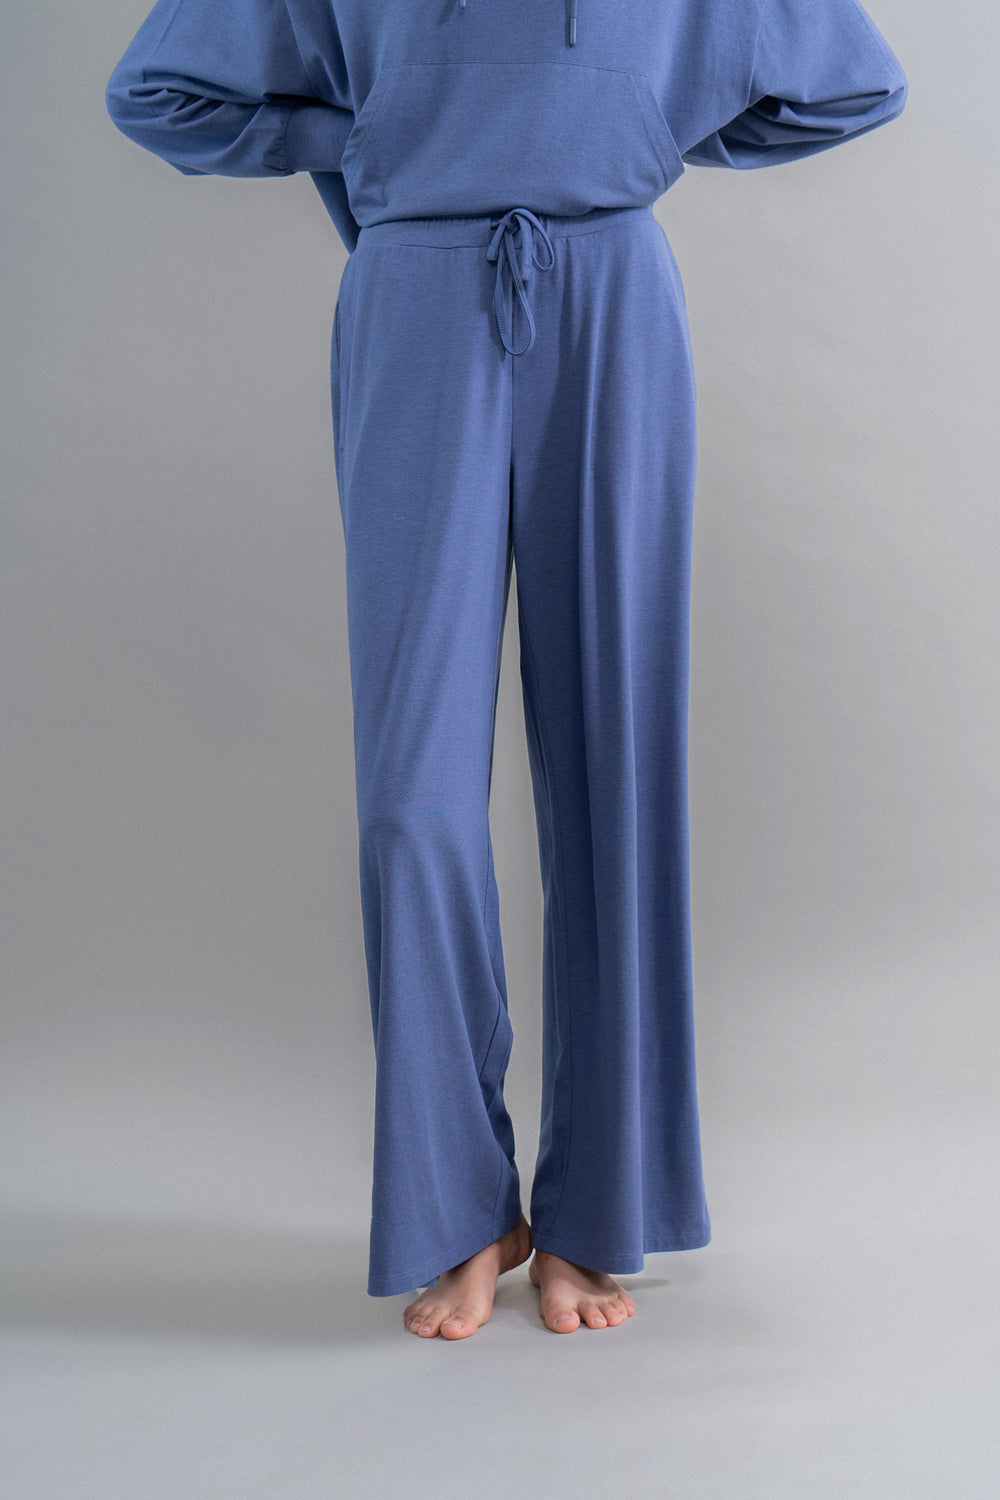 Limited Edition Luxflo® Travel Blue Flared Pajamas